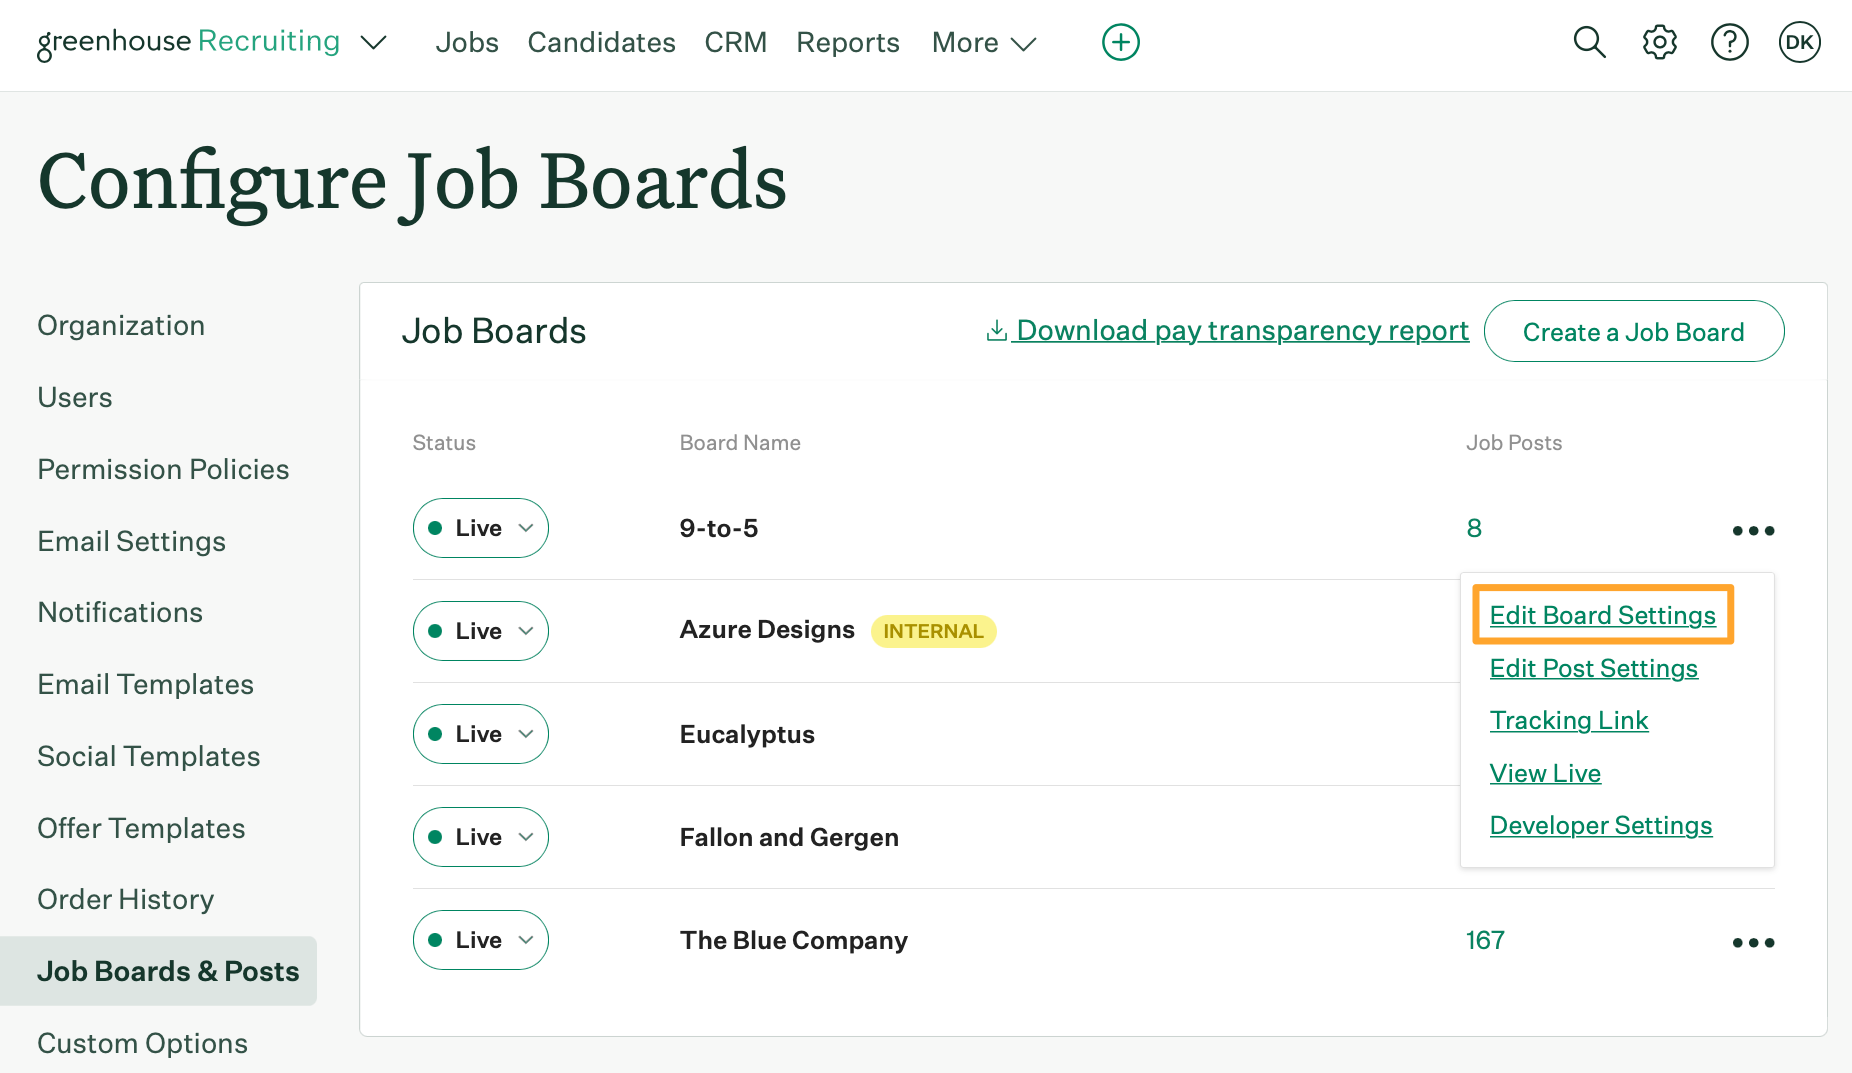 The Configure Job Boards page shows example job boards with Edit Board Settings highlighted in marigold on a job board dropdown menu